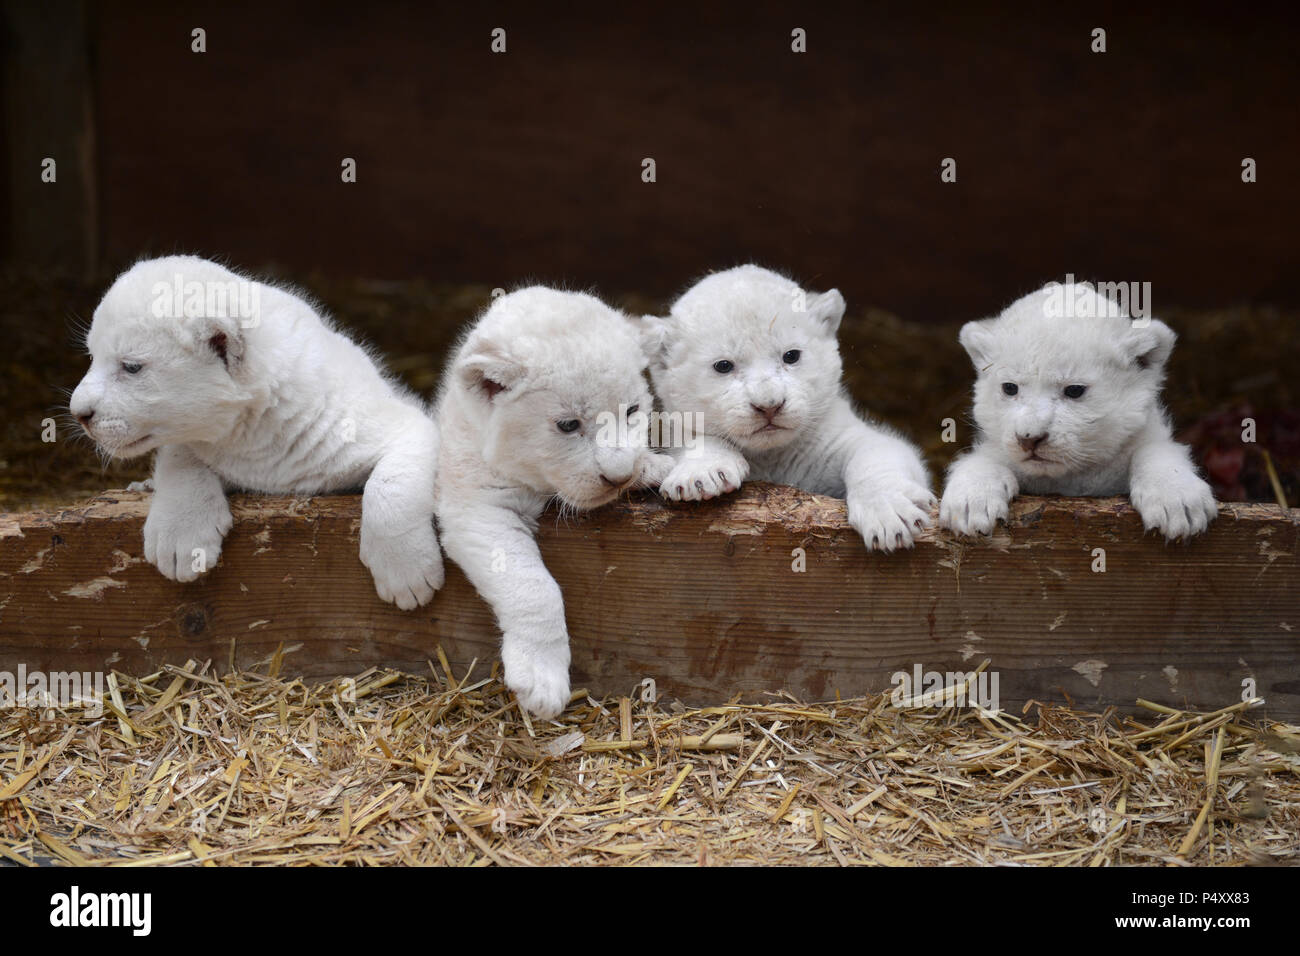 Quadruplet white lion cubs in a nice pose looking cute Stock Photo - Alamy